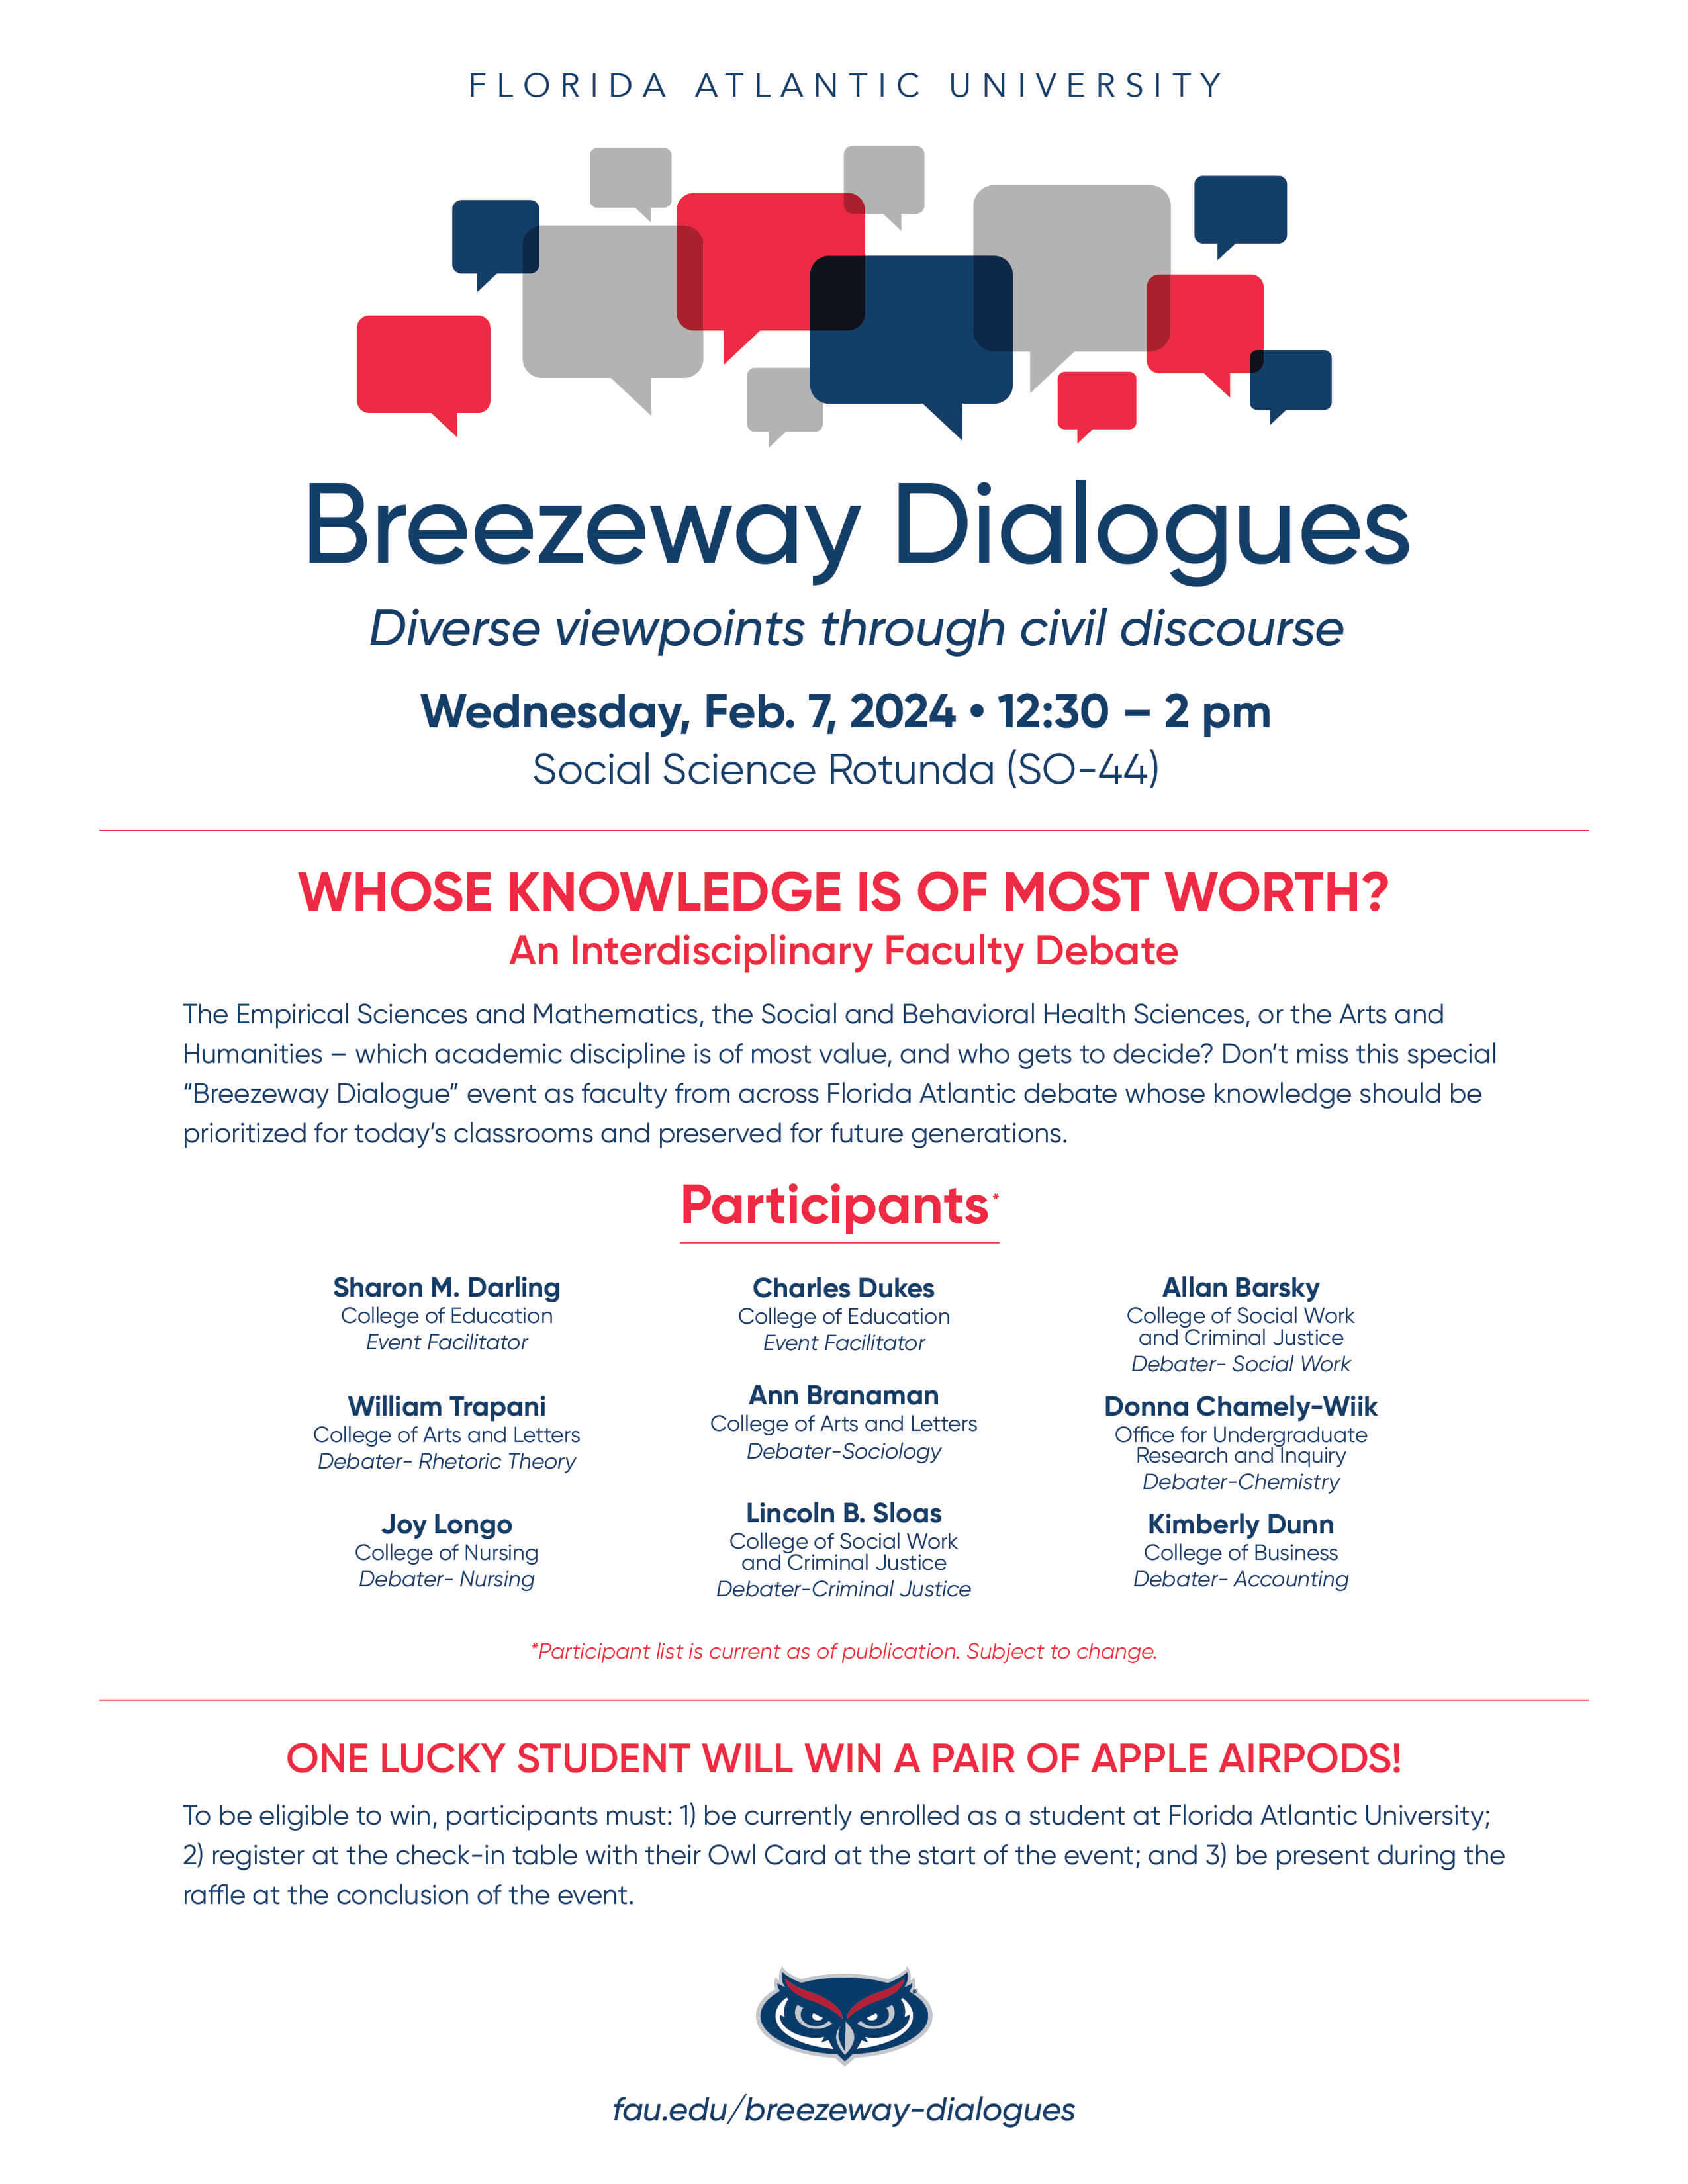 Breezeway Dialogue Poster: Whose Knowledge is of Most Worth? An Interdisciplinary Faculty Debate.